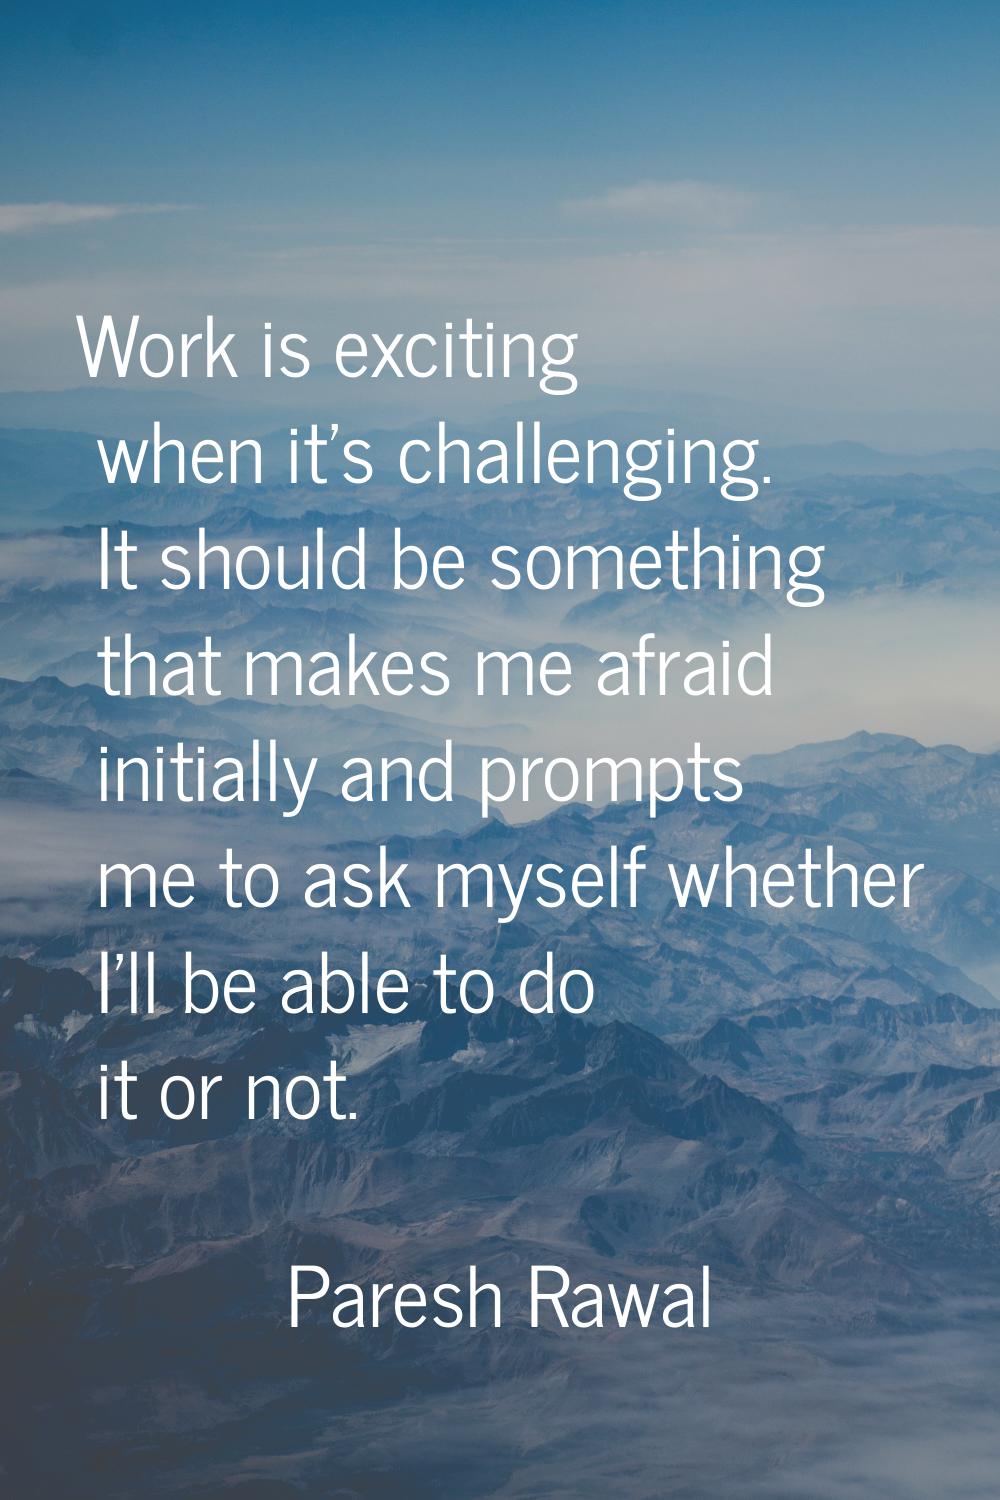 Work is exciting when it's challenging. It should be something that makes me afraid initially and p